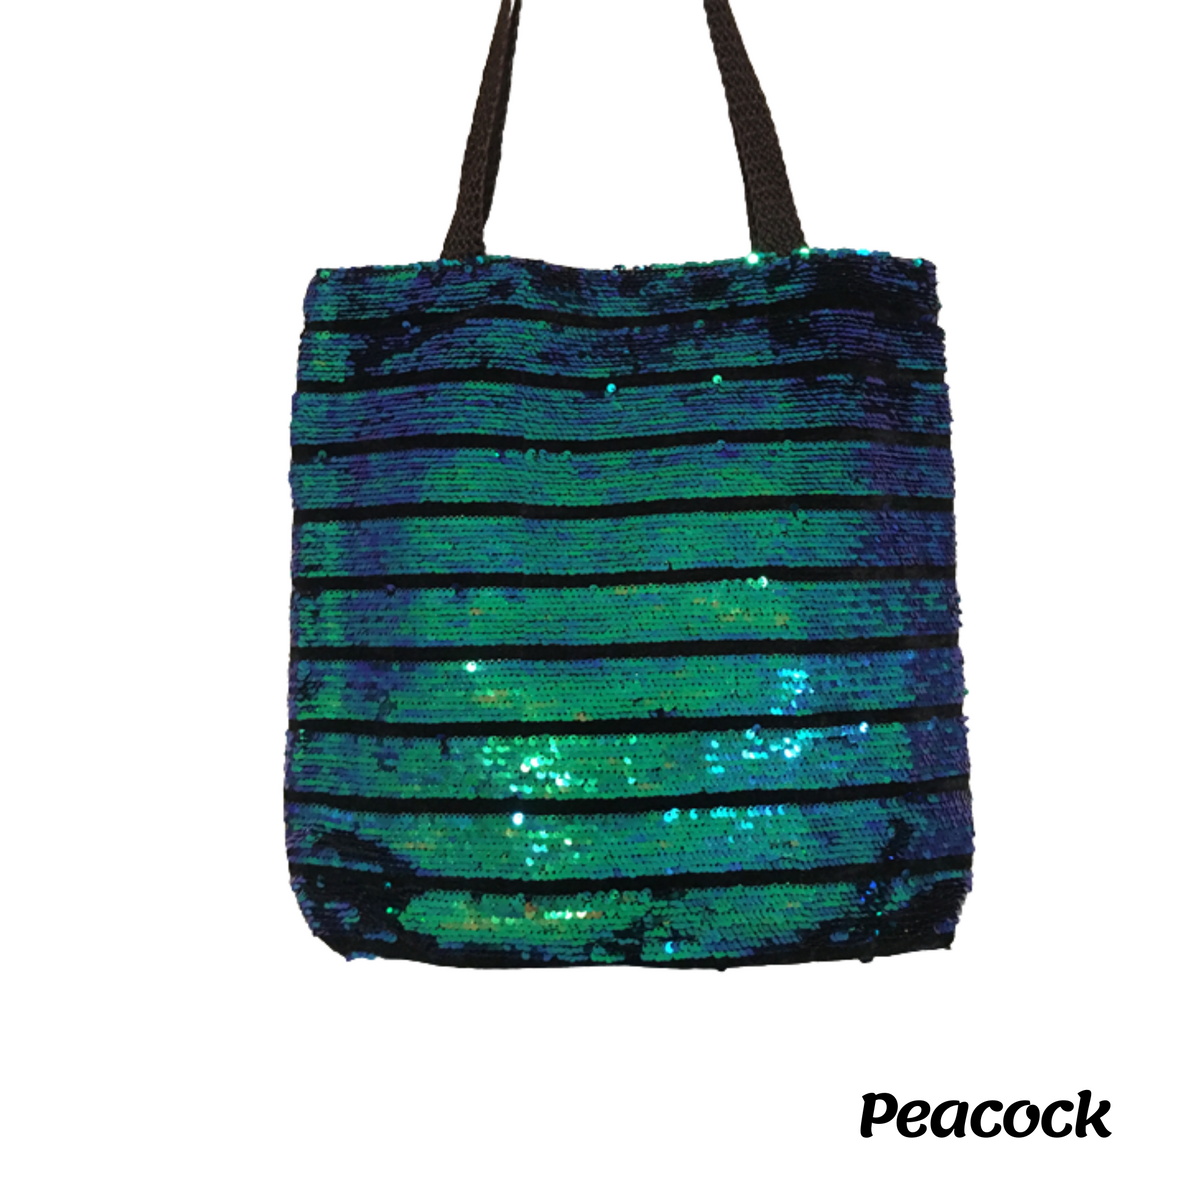 Sizzle Tote - Peacock